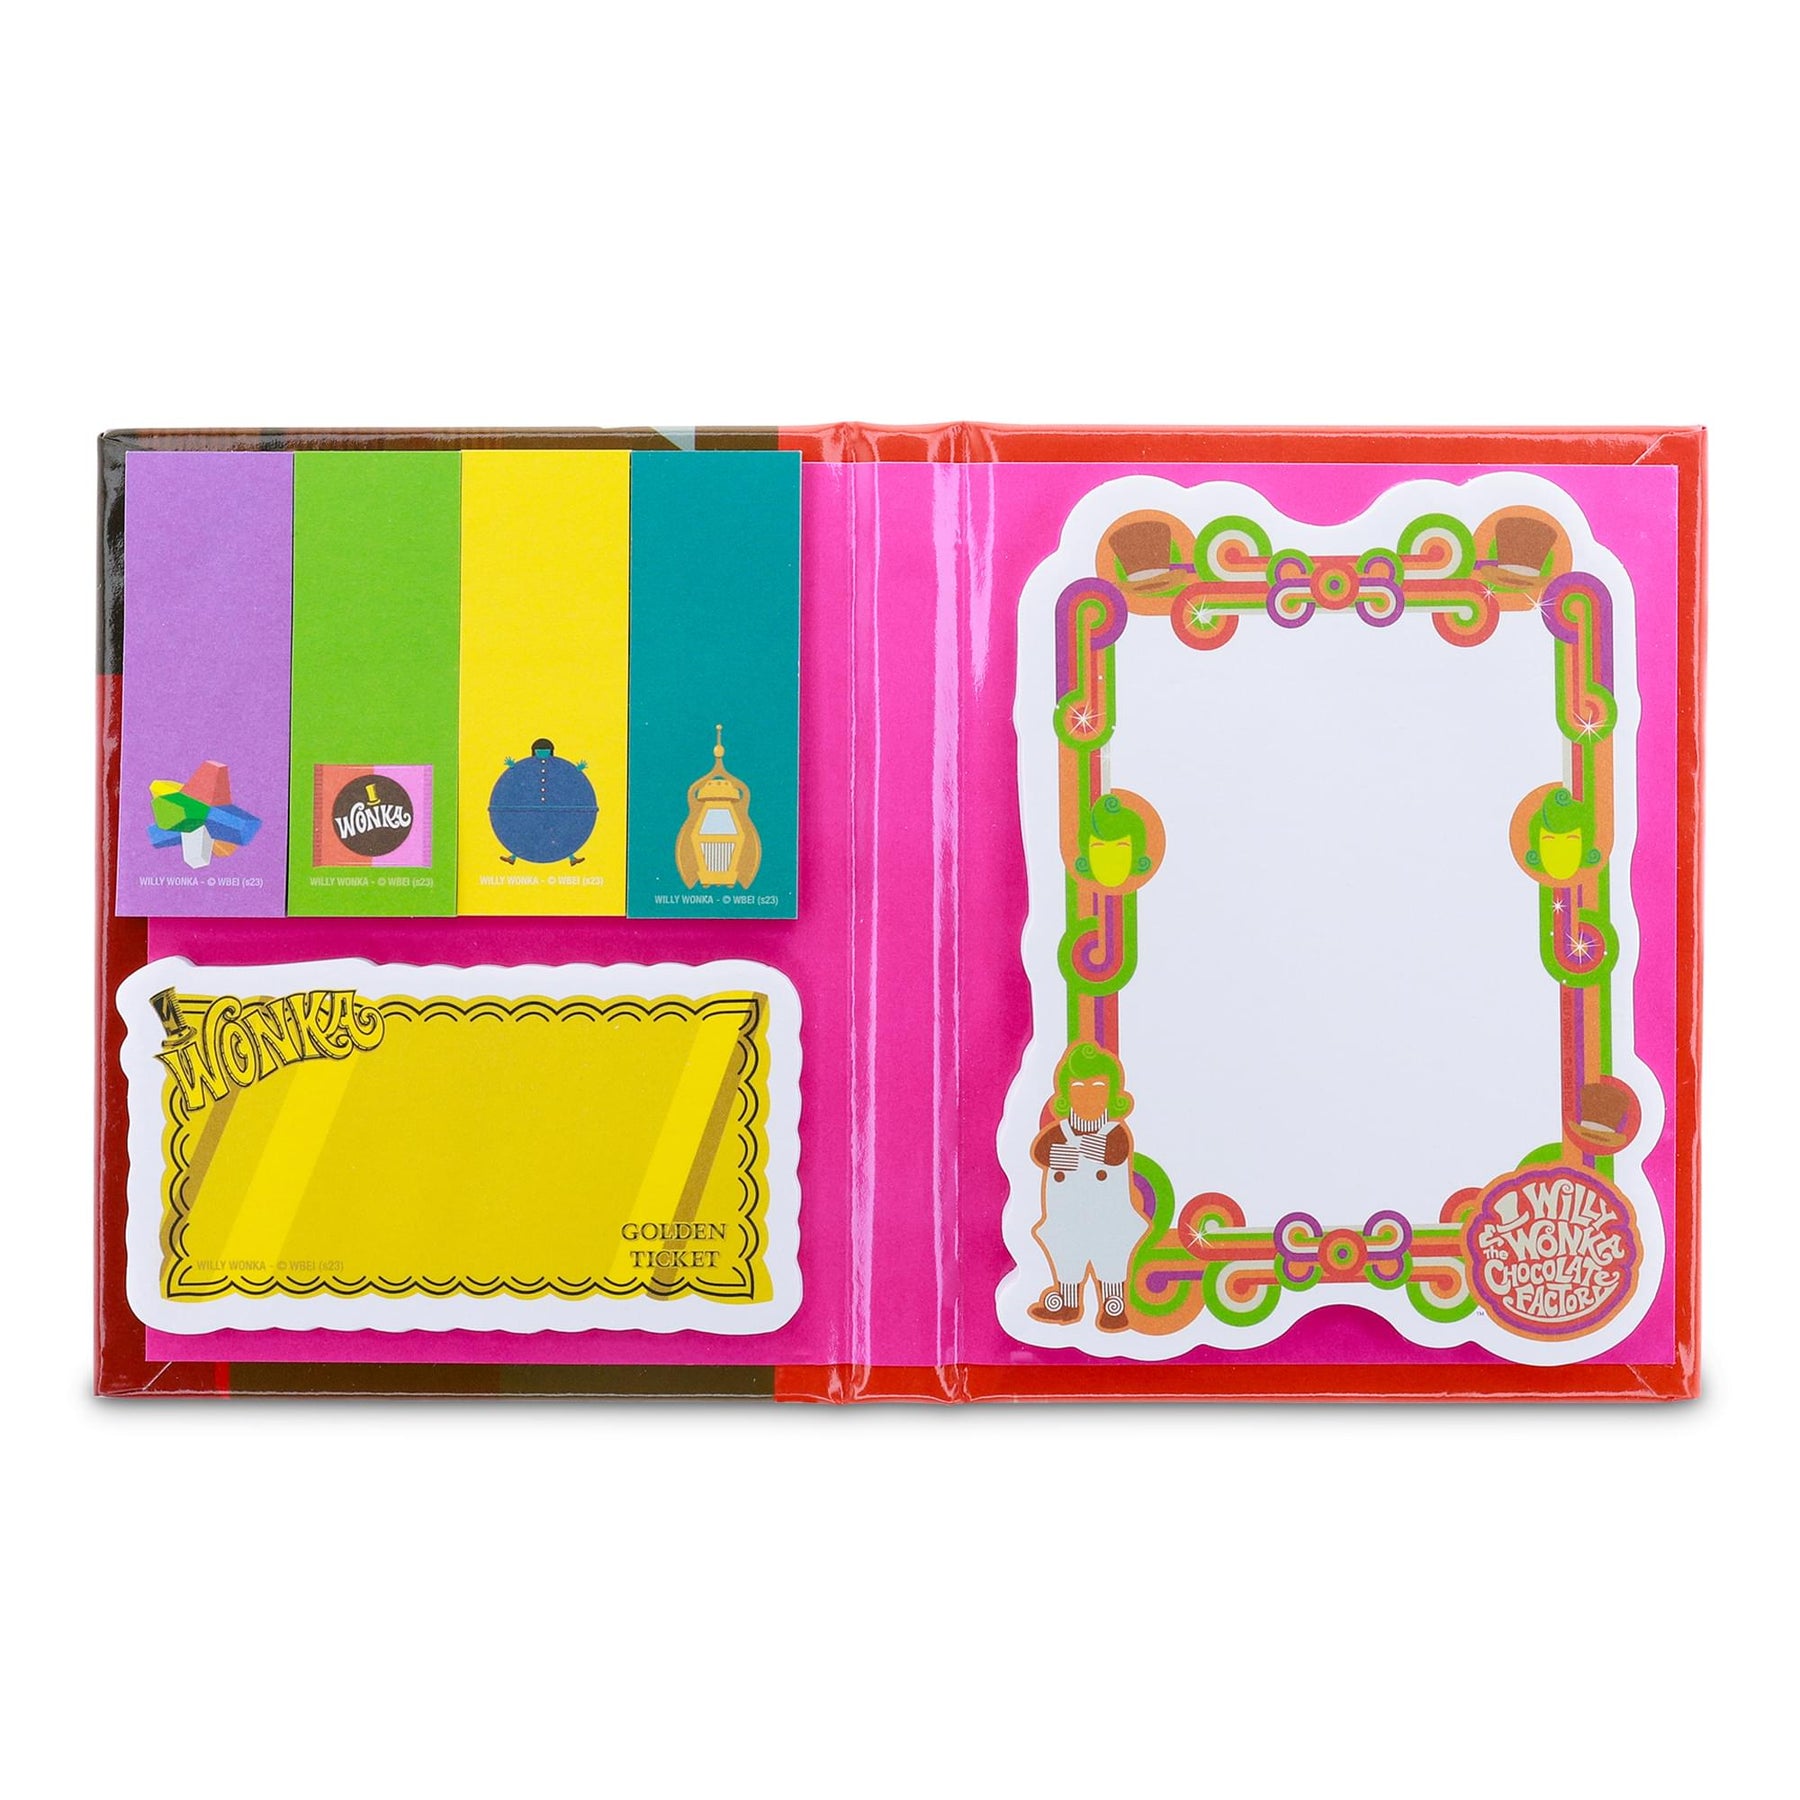 Willy Wonka Chocolate Bar Icons Sticky Note and Tab Box Set